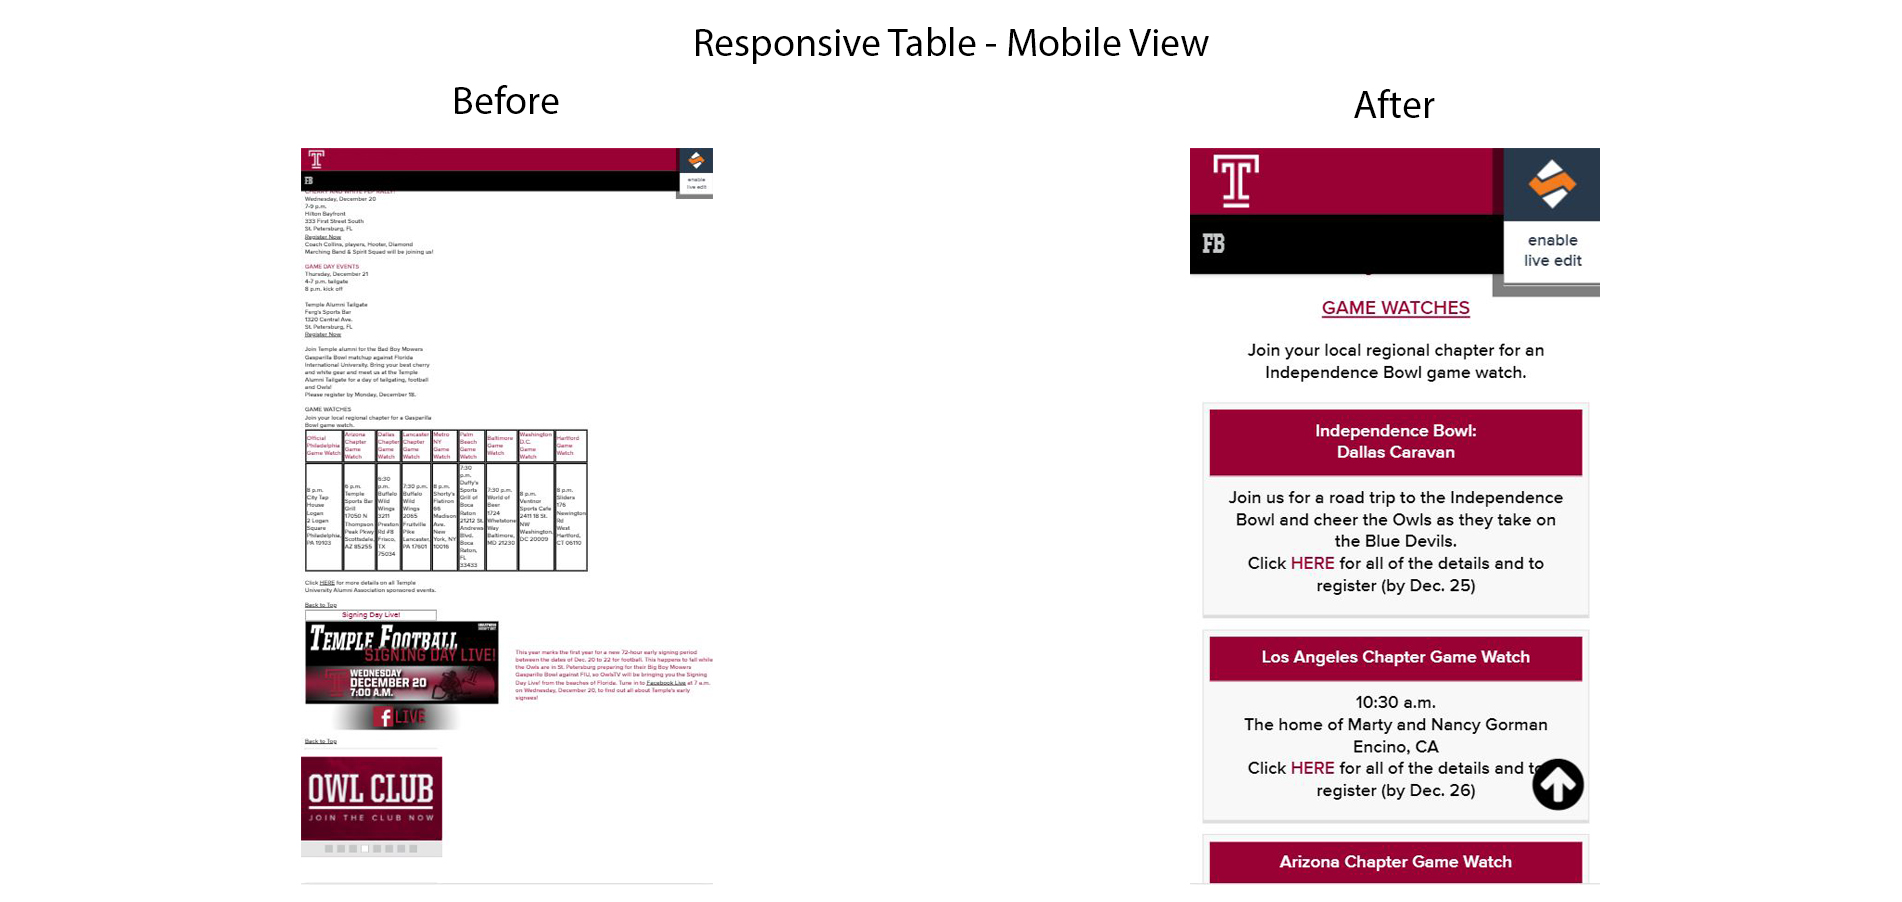 Responsive Table - Mobile View